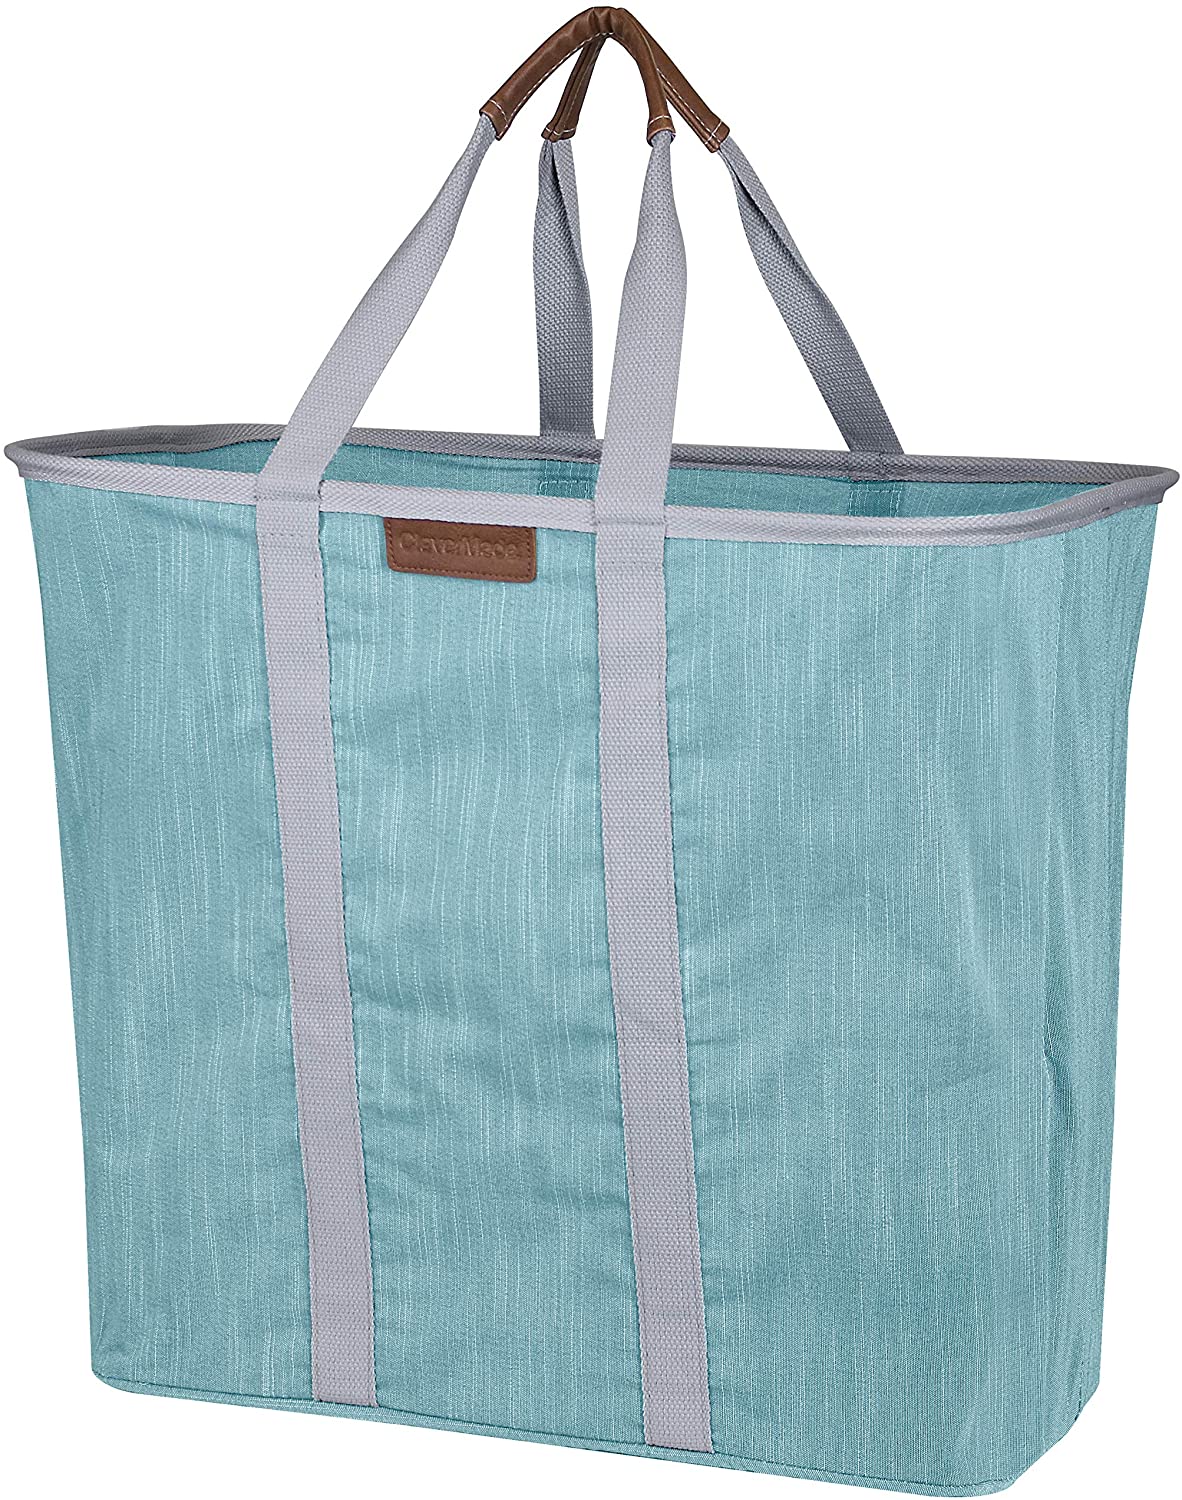 Clevermade Collapsible Laundry Caddy, Large Foldable Clothes Hamper Bag, Laundry